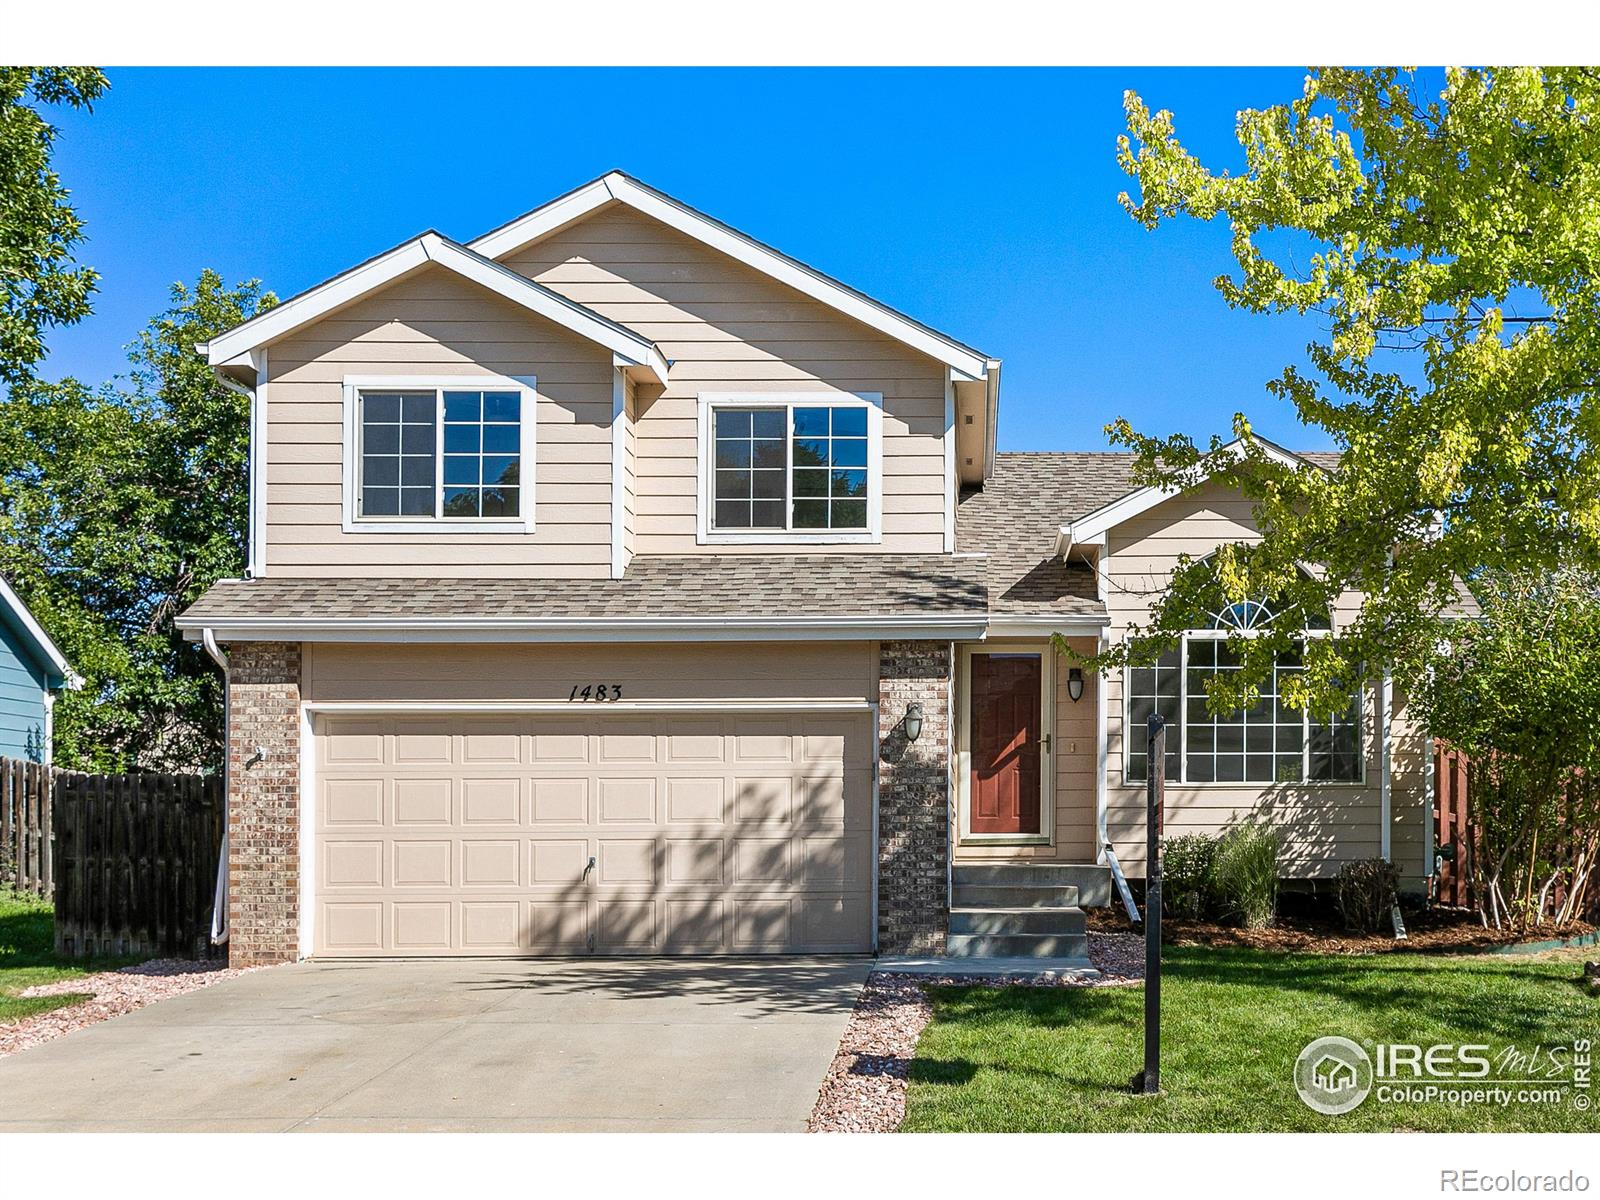 1483  Lincoln Circle, longmont MLS: 456789996251 Beds: 3 Baths: 3 Price: $514,900